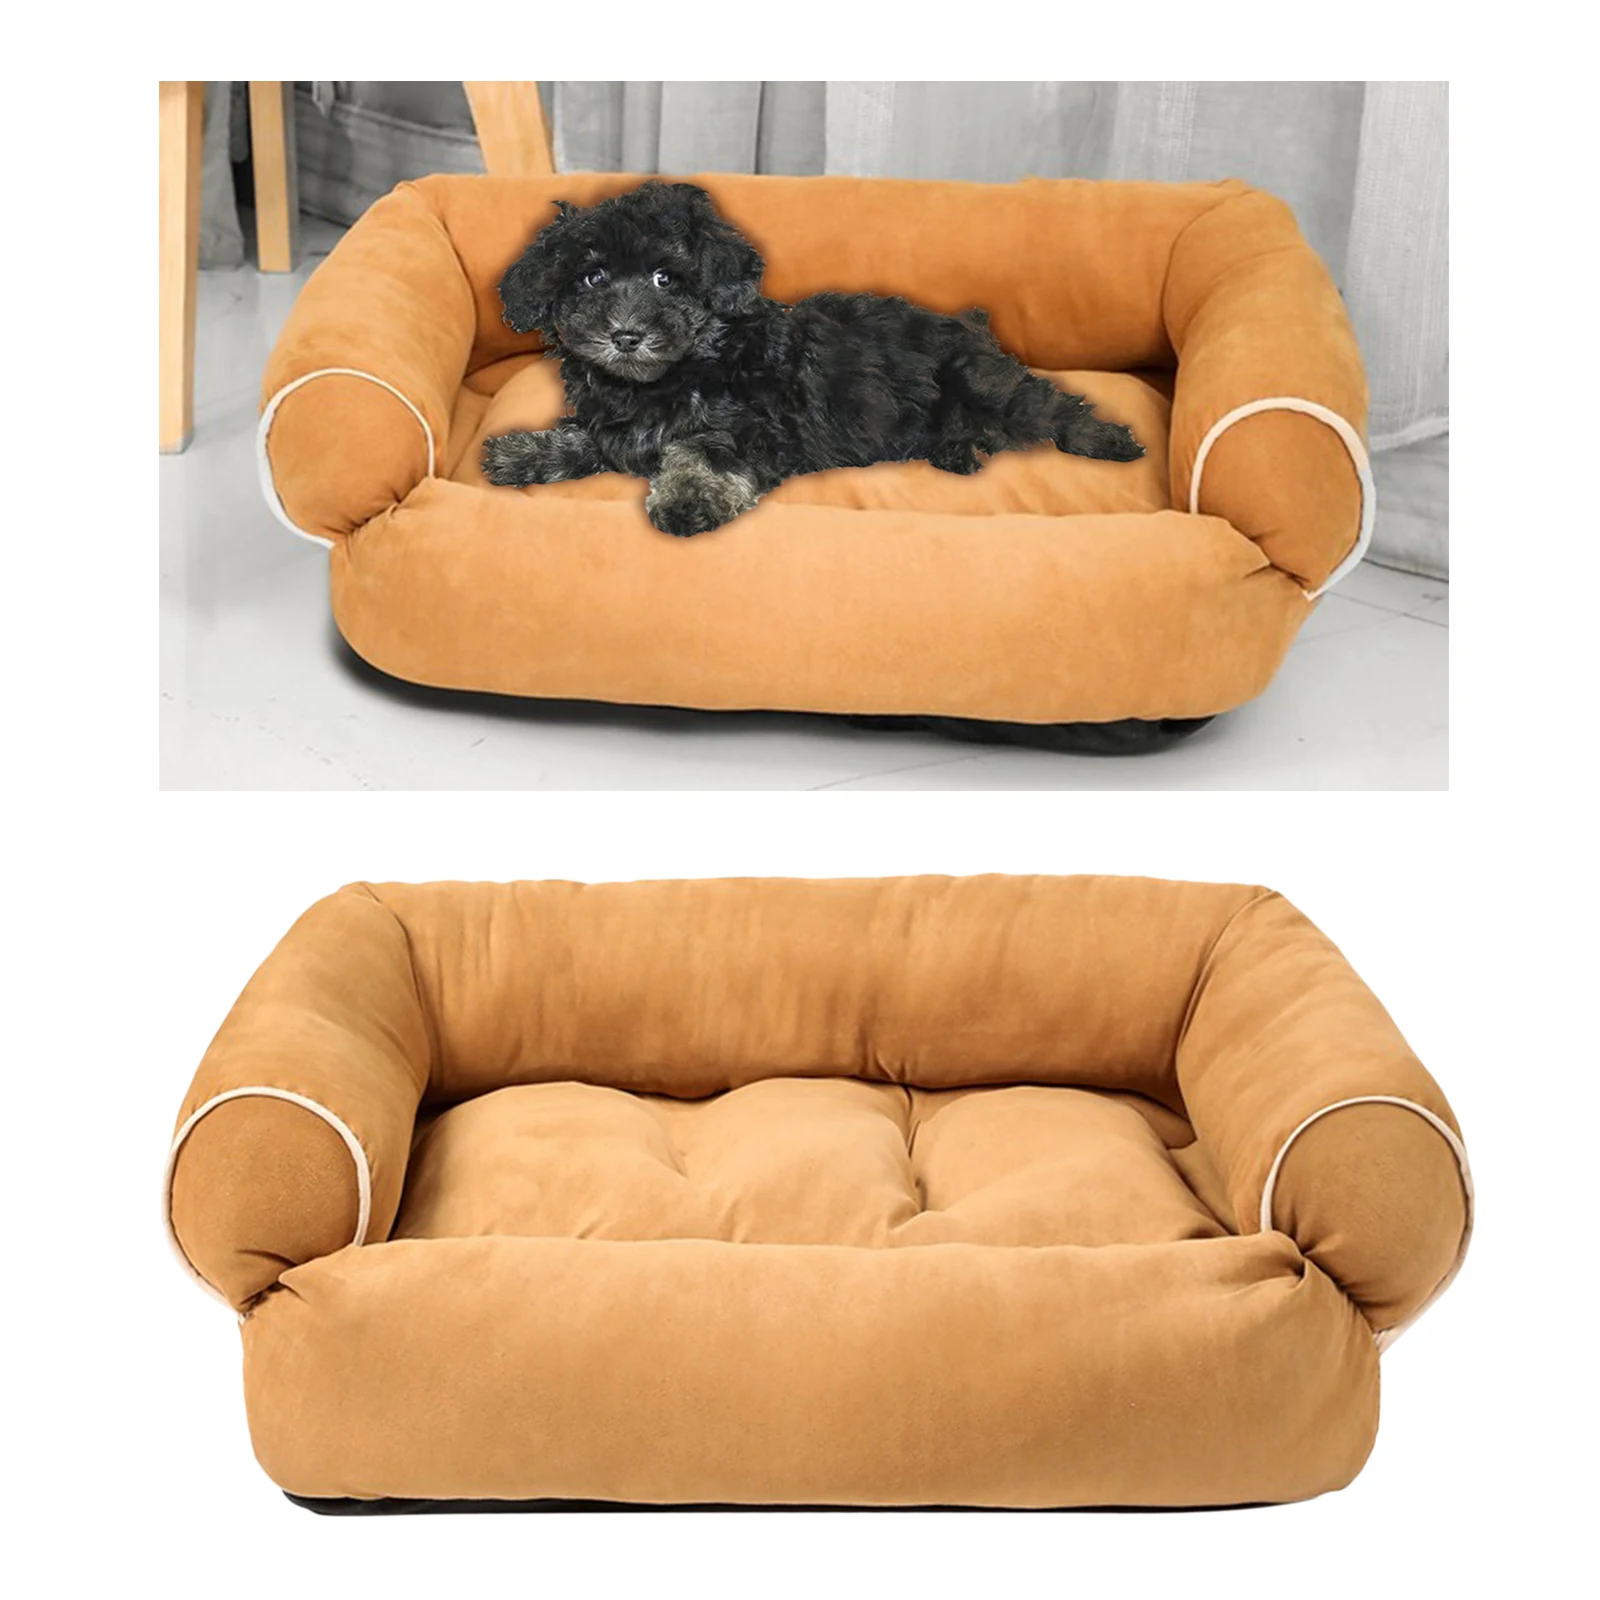 Dog Bed Pet Warm Bed Dog Cats Sleeping Bed Dog Sofa Bed Sleeping Bag Kennel Cat Puppy Sofa Bed